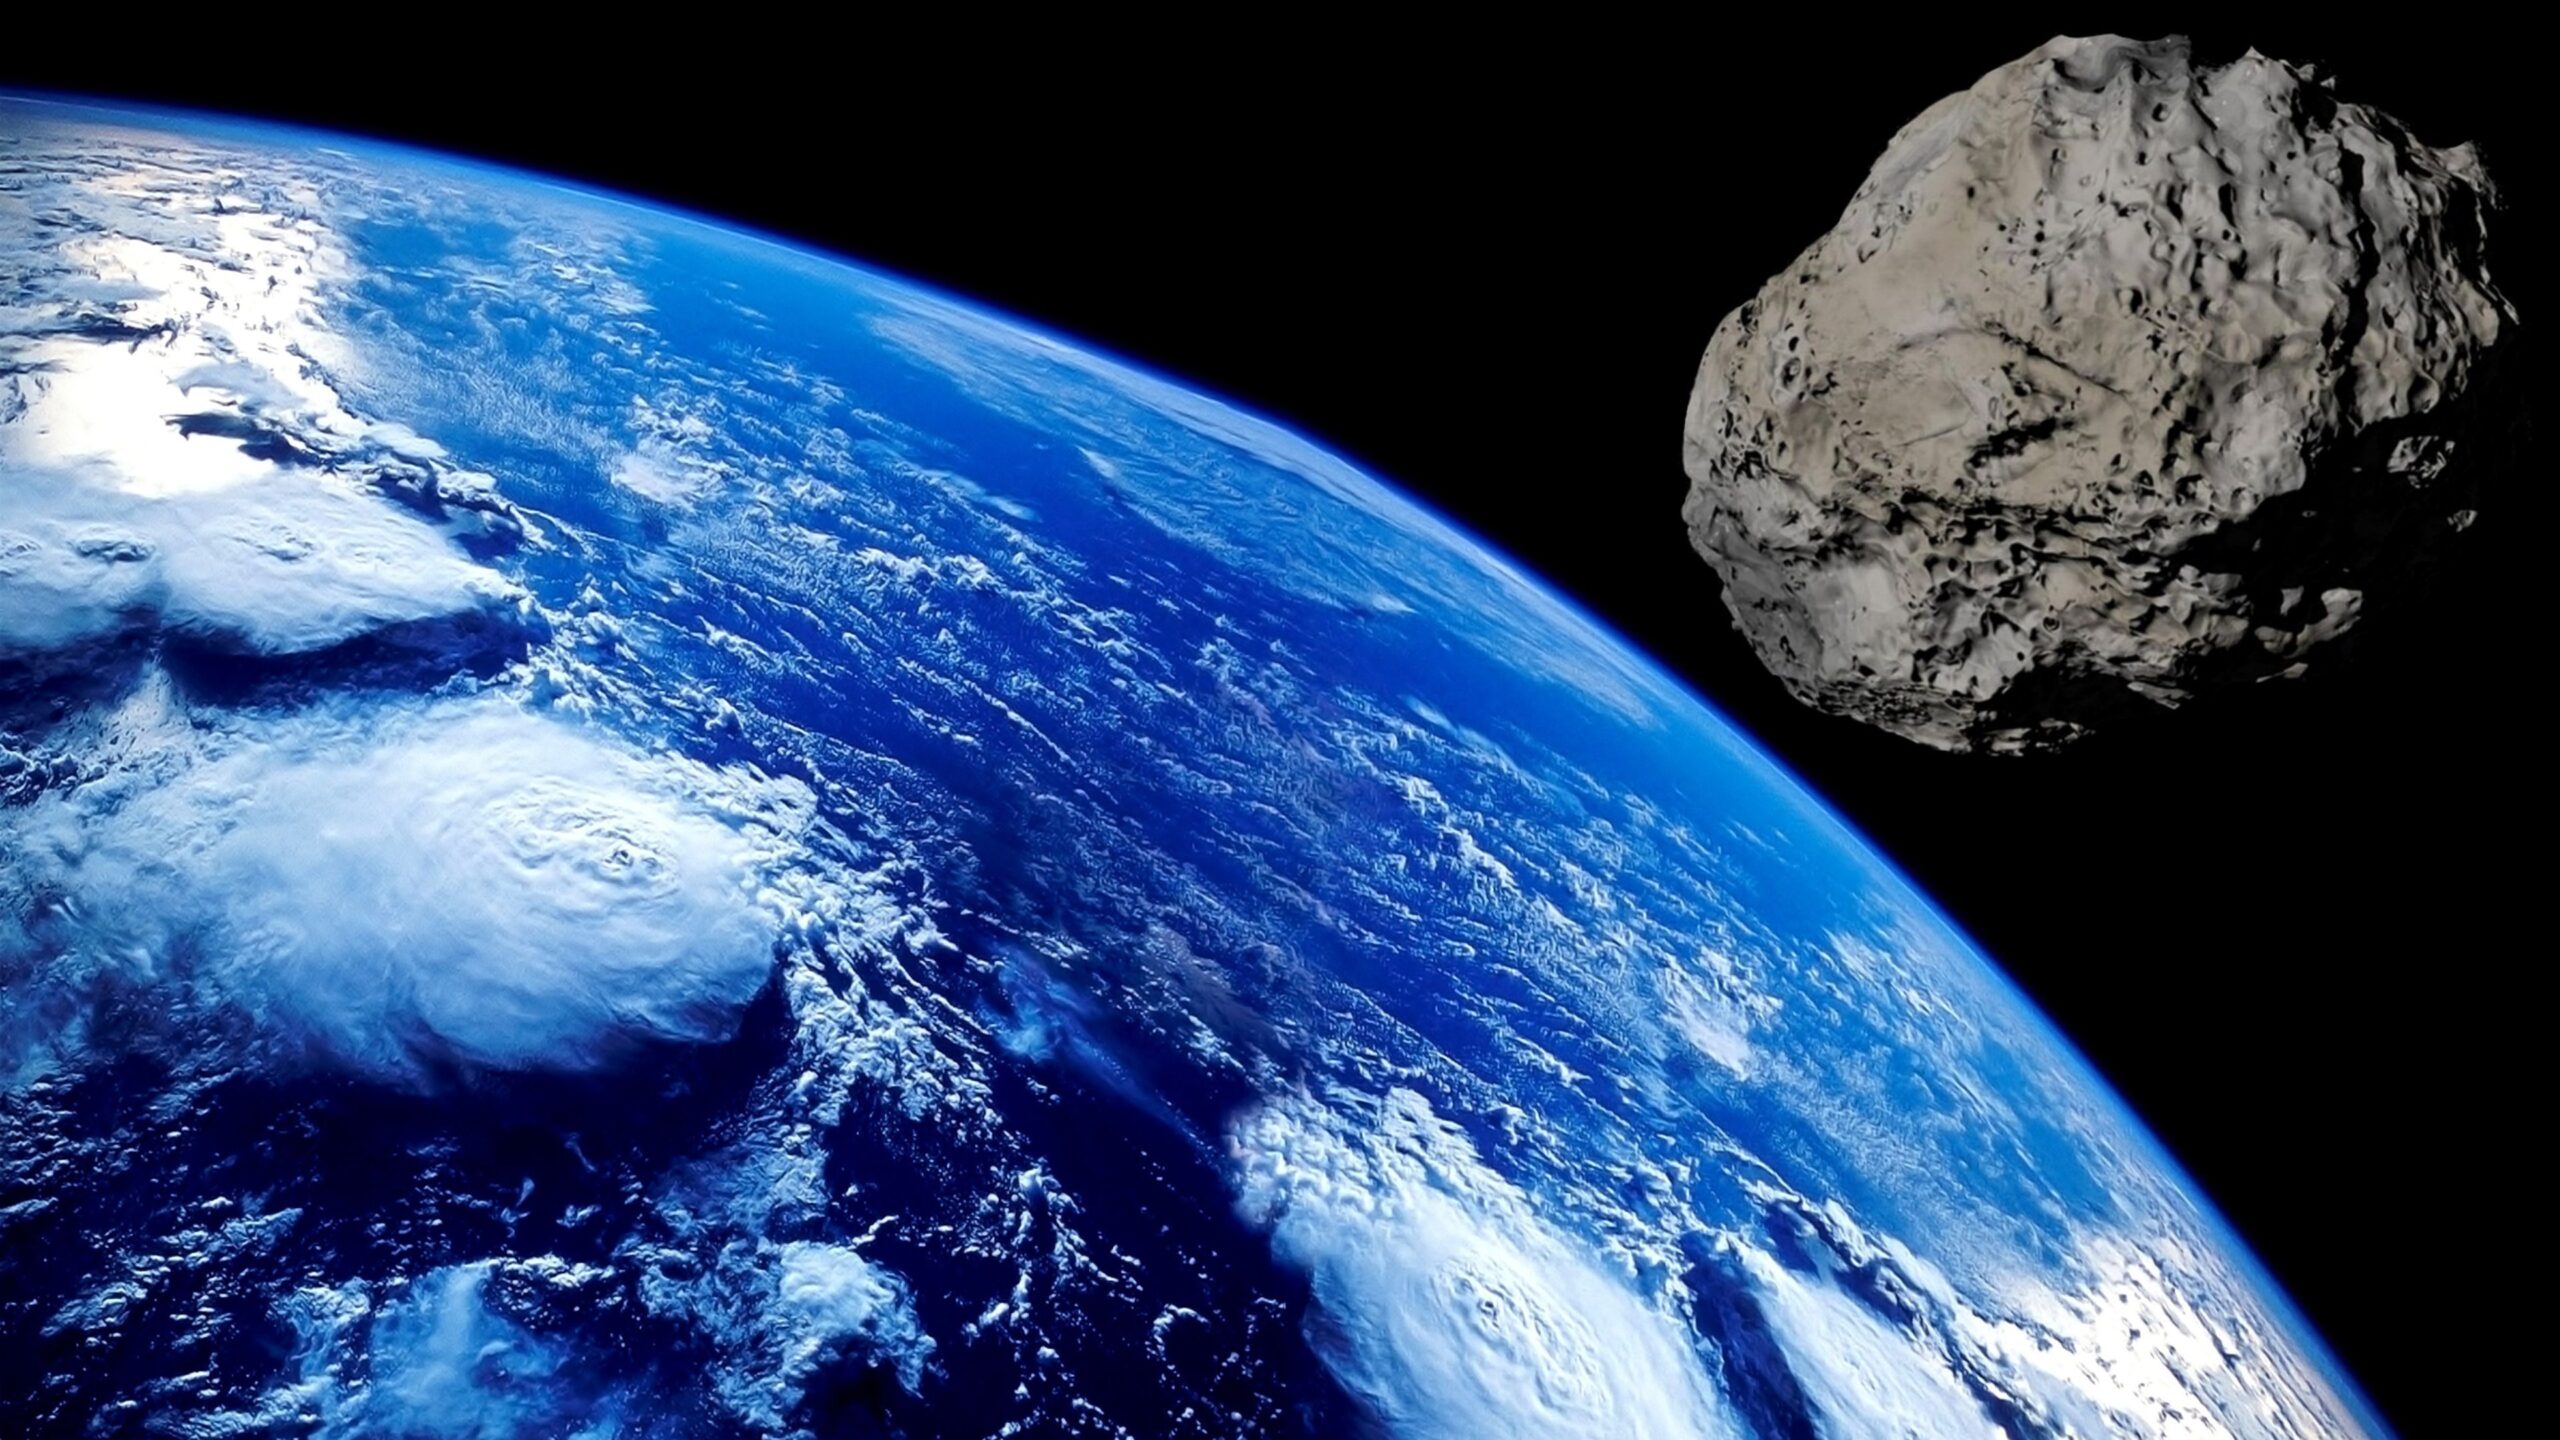 An asteroid, classified as ‘potentially hazardous’ and measuring 2,000 feet wide, has recently passed by Earth at its closest distance. It is visible through a telescope.